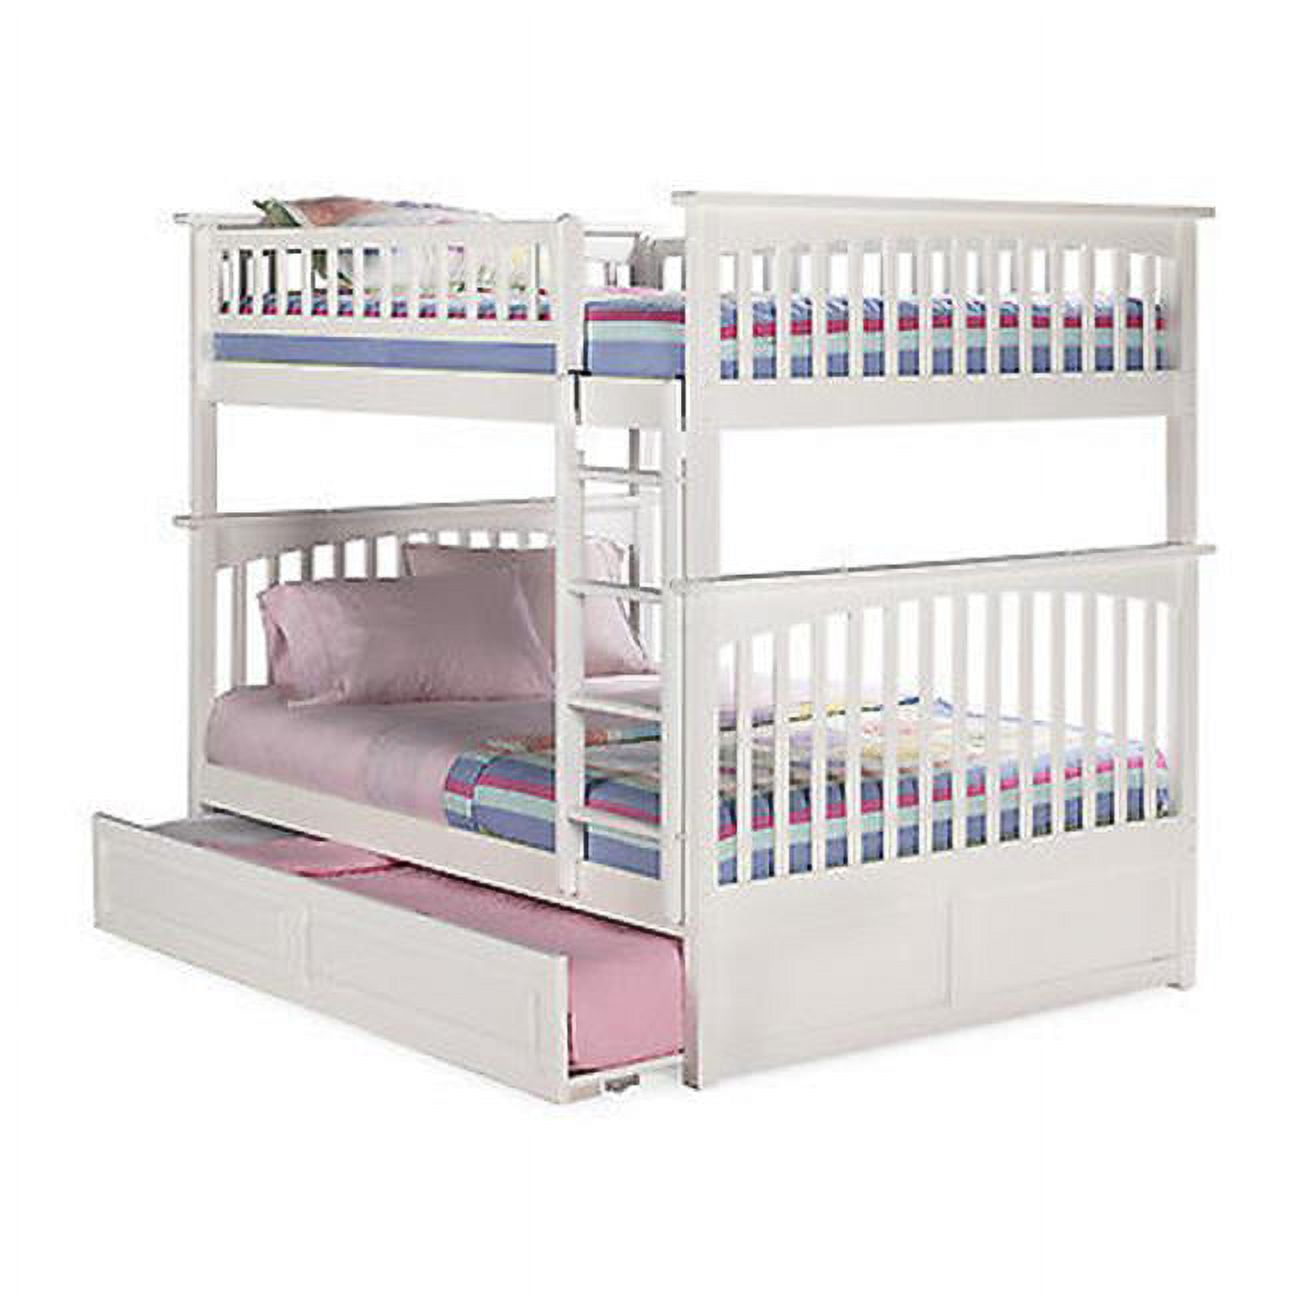 Picture of Atlantic Furniture AB55532 Columbia Bunkbed with Trundle Bed, Full Over Full Size - White